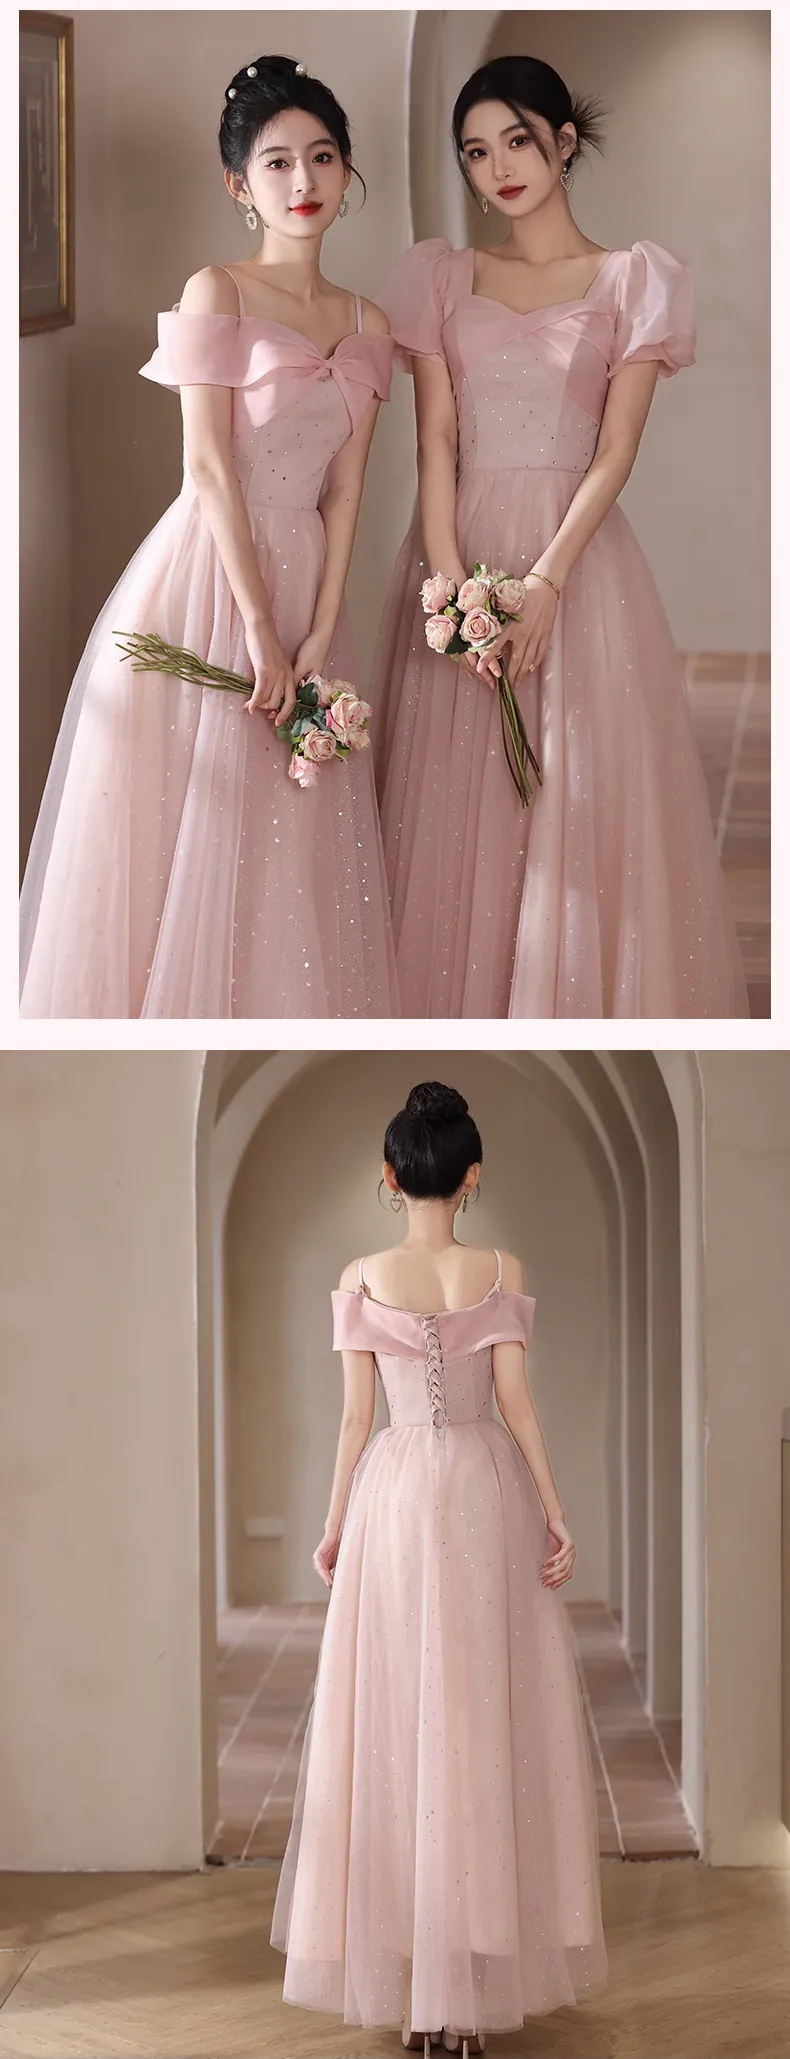 Sweet-Pink-Wedding-Guest-Bridesmaid-Cocktail-Formal-Party-Dress23